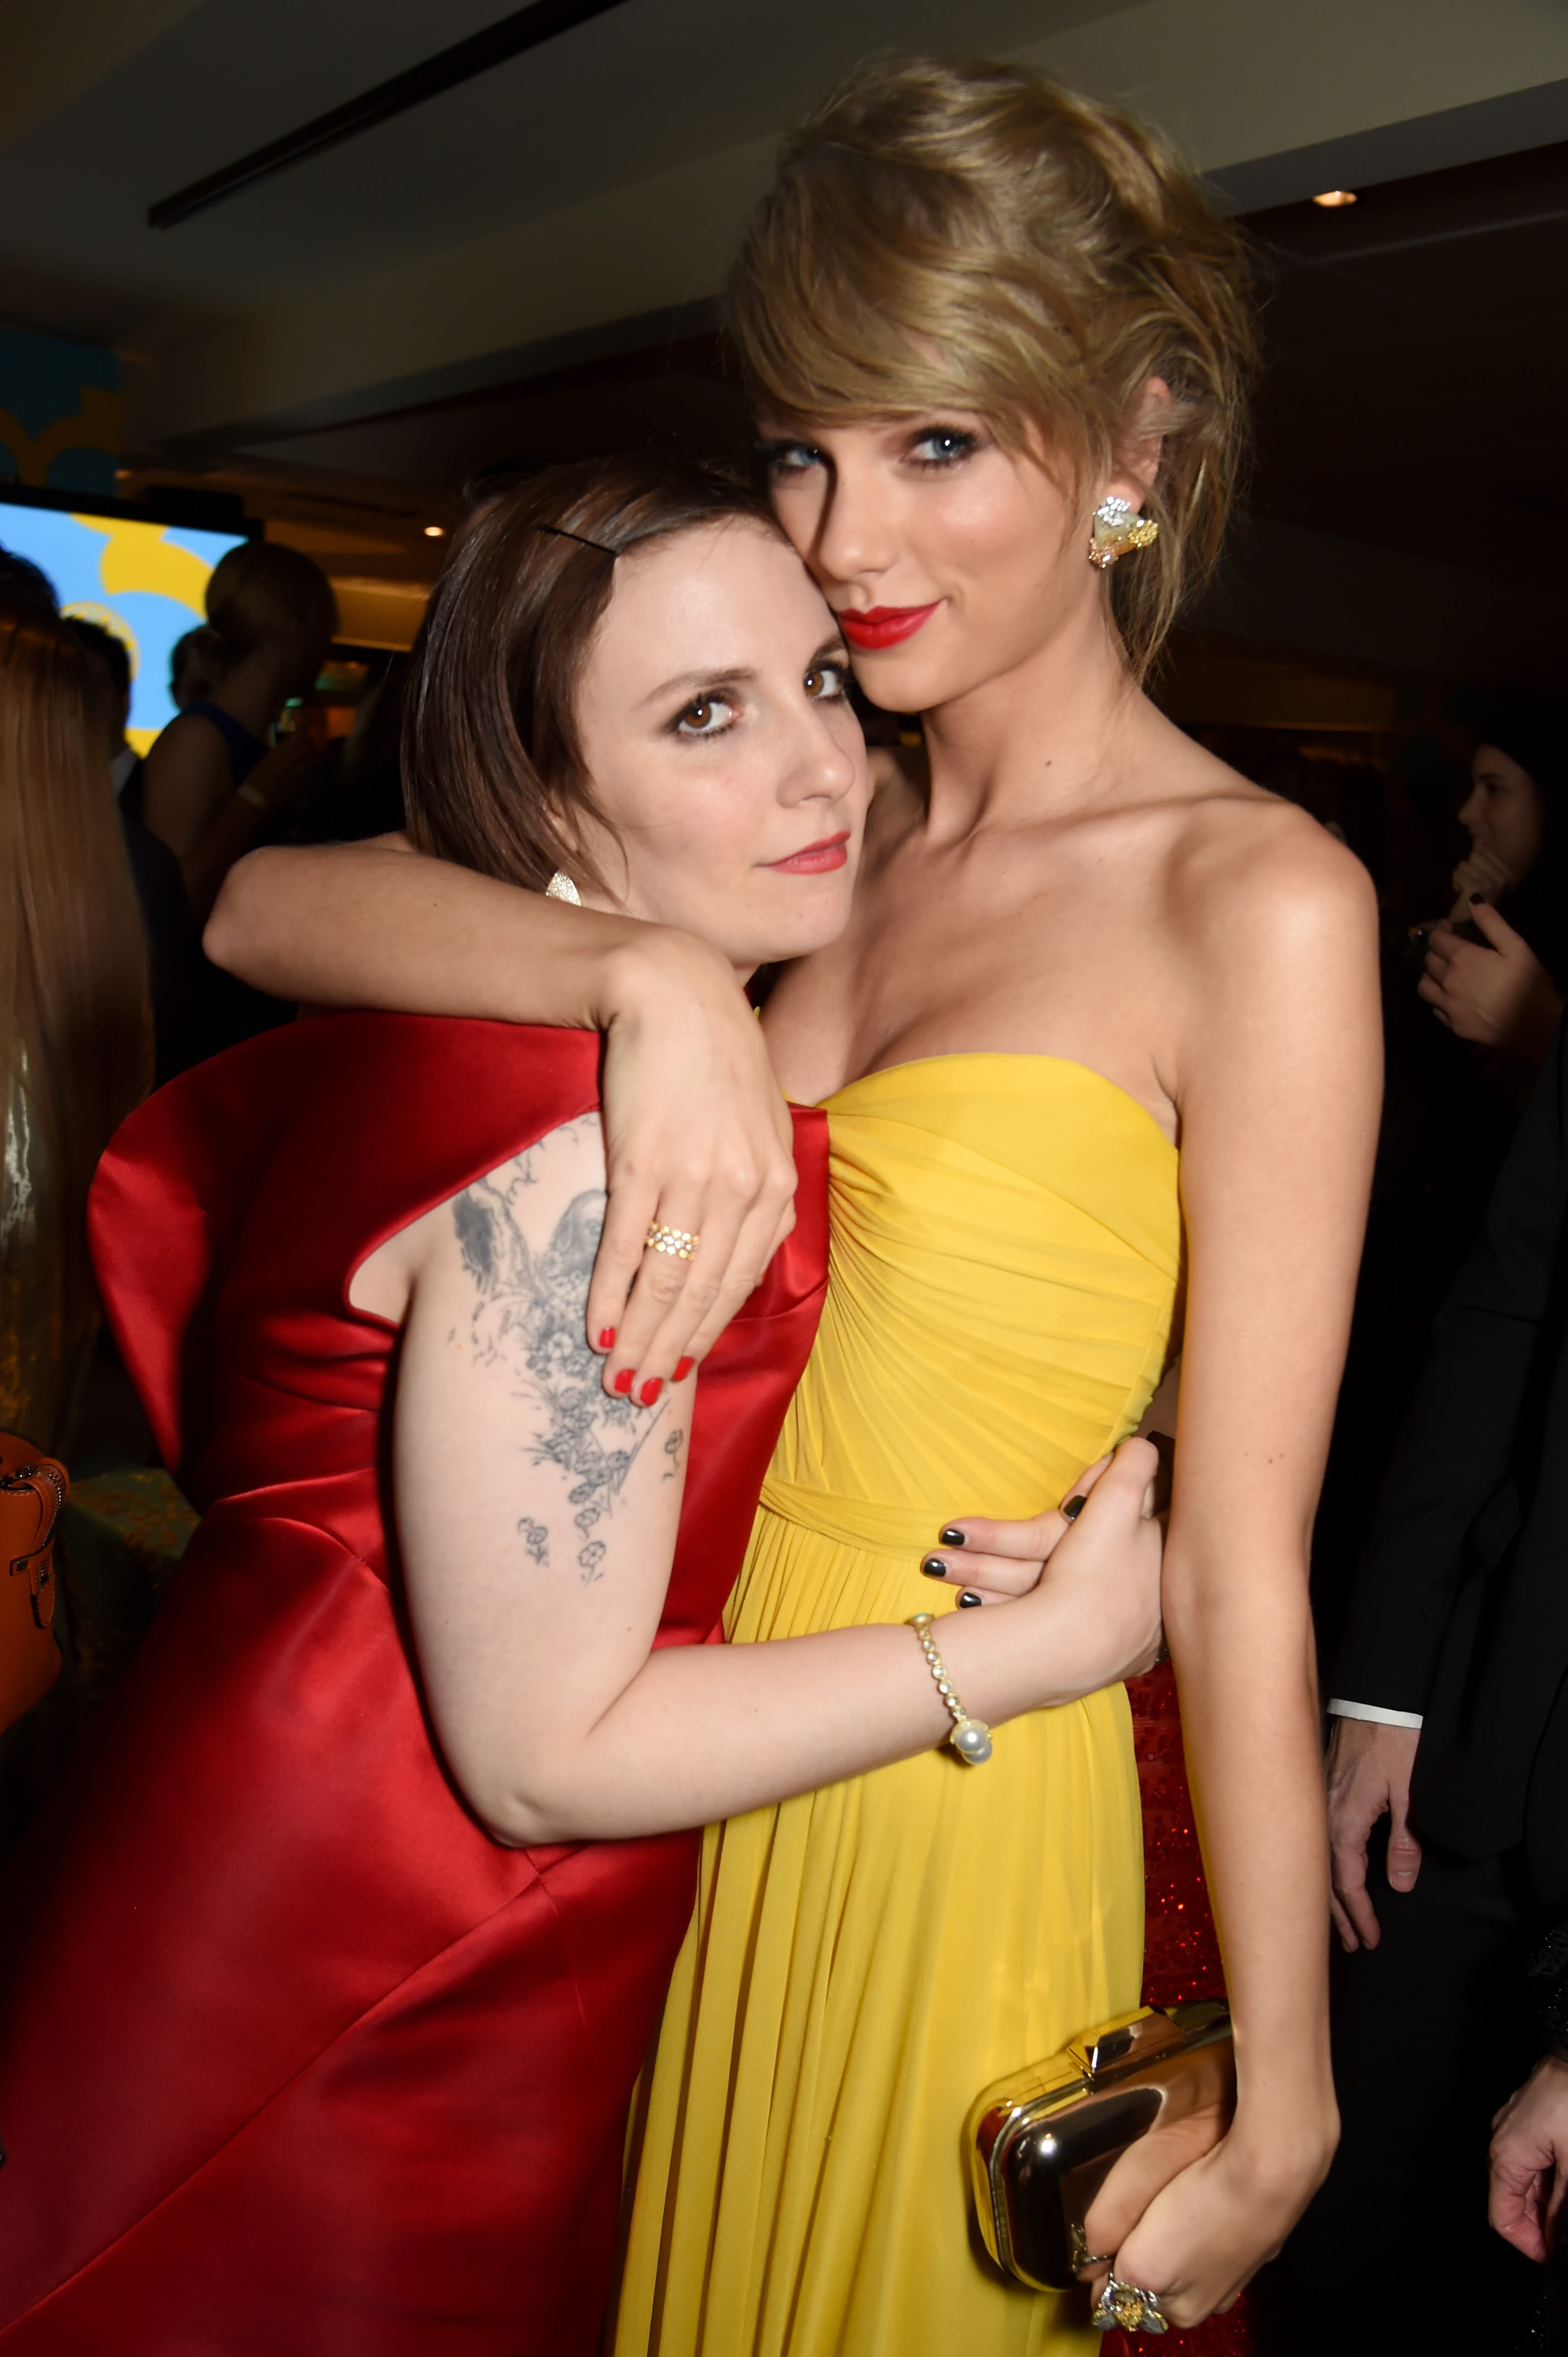 Lena Dunham Says She’s ‘Protective’ Over Friend Taylor Swift in ‘Every Single Way’